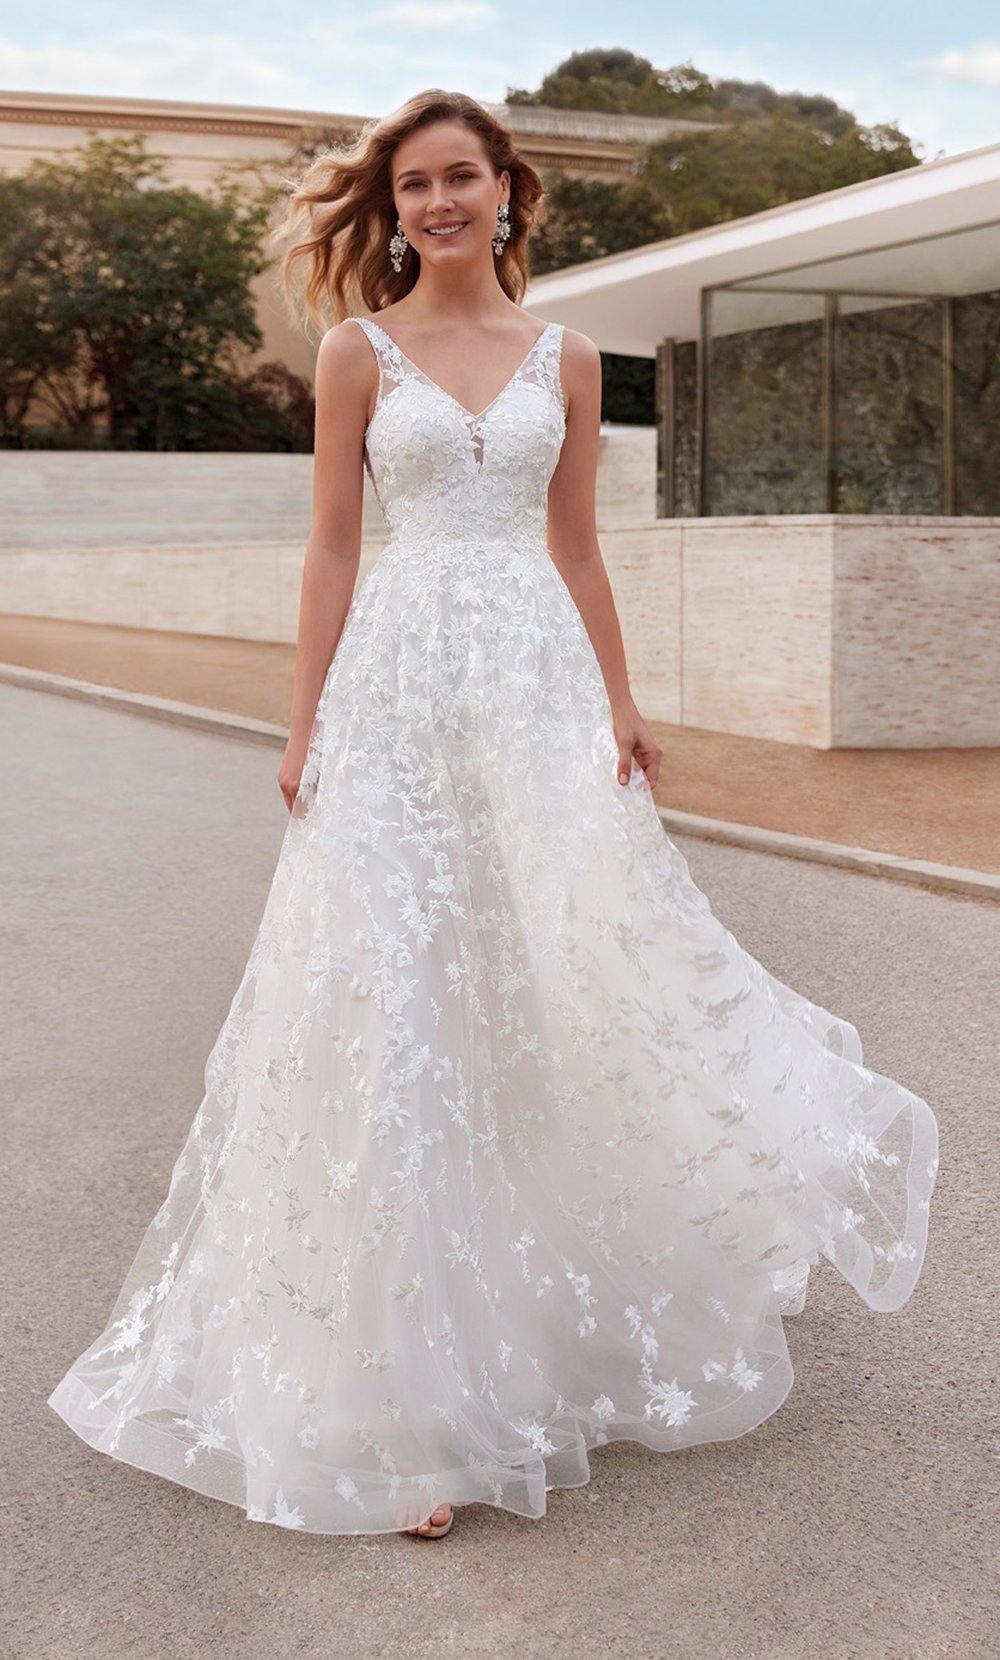 Half shoulder Pure White Wedding Dress with Lace,Pearls and Bead work |  MissMad Bridal Gowns